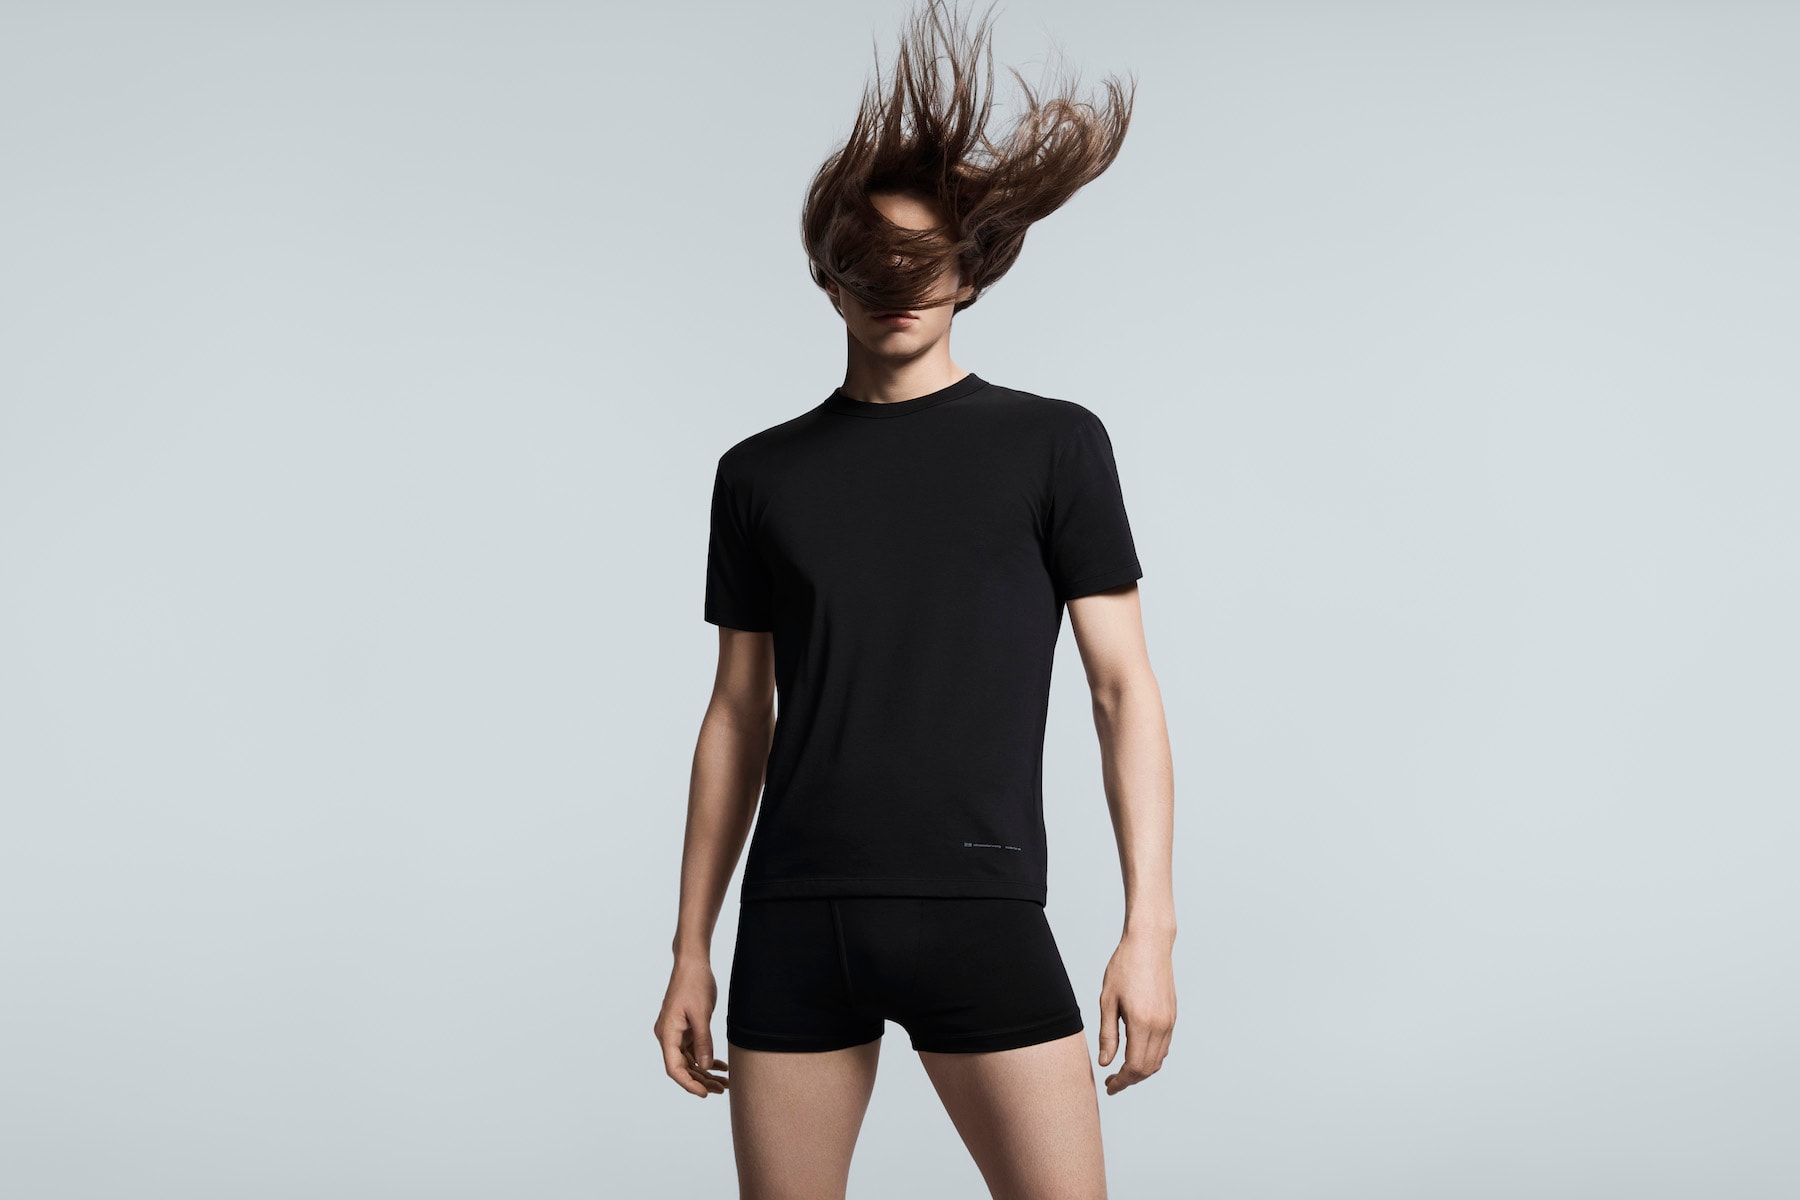 Alexander Wang x Uniqlo Second Collaboration Apparel Range Capsule Reveal Teaser